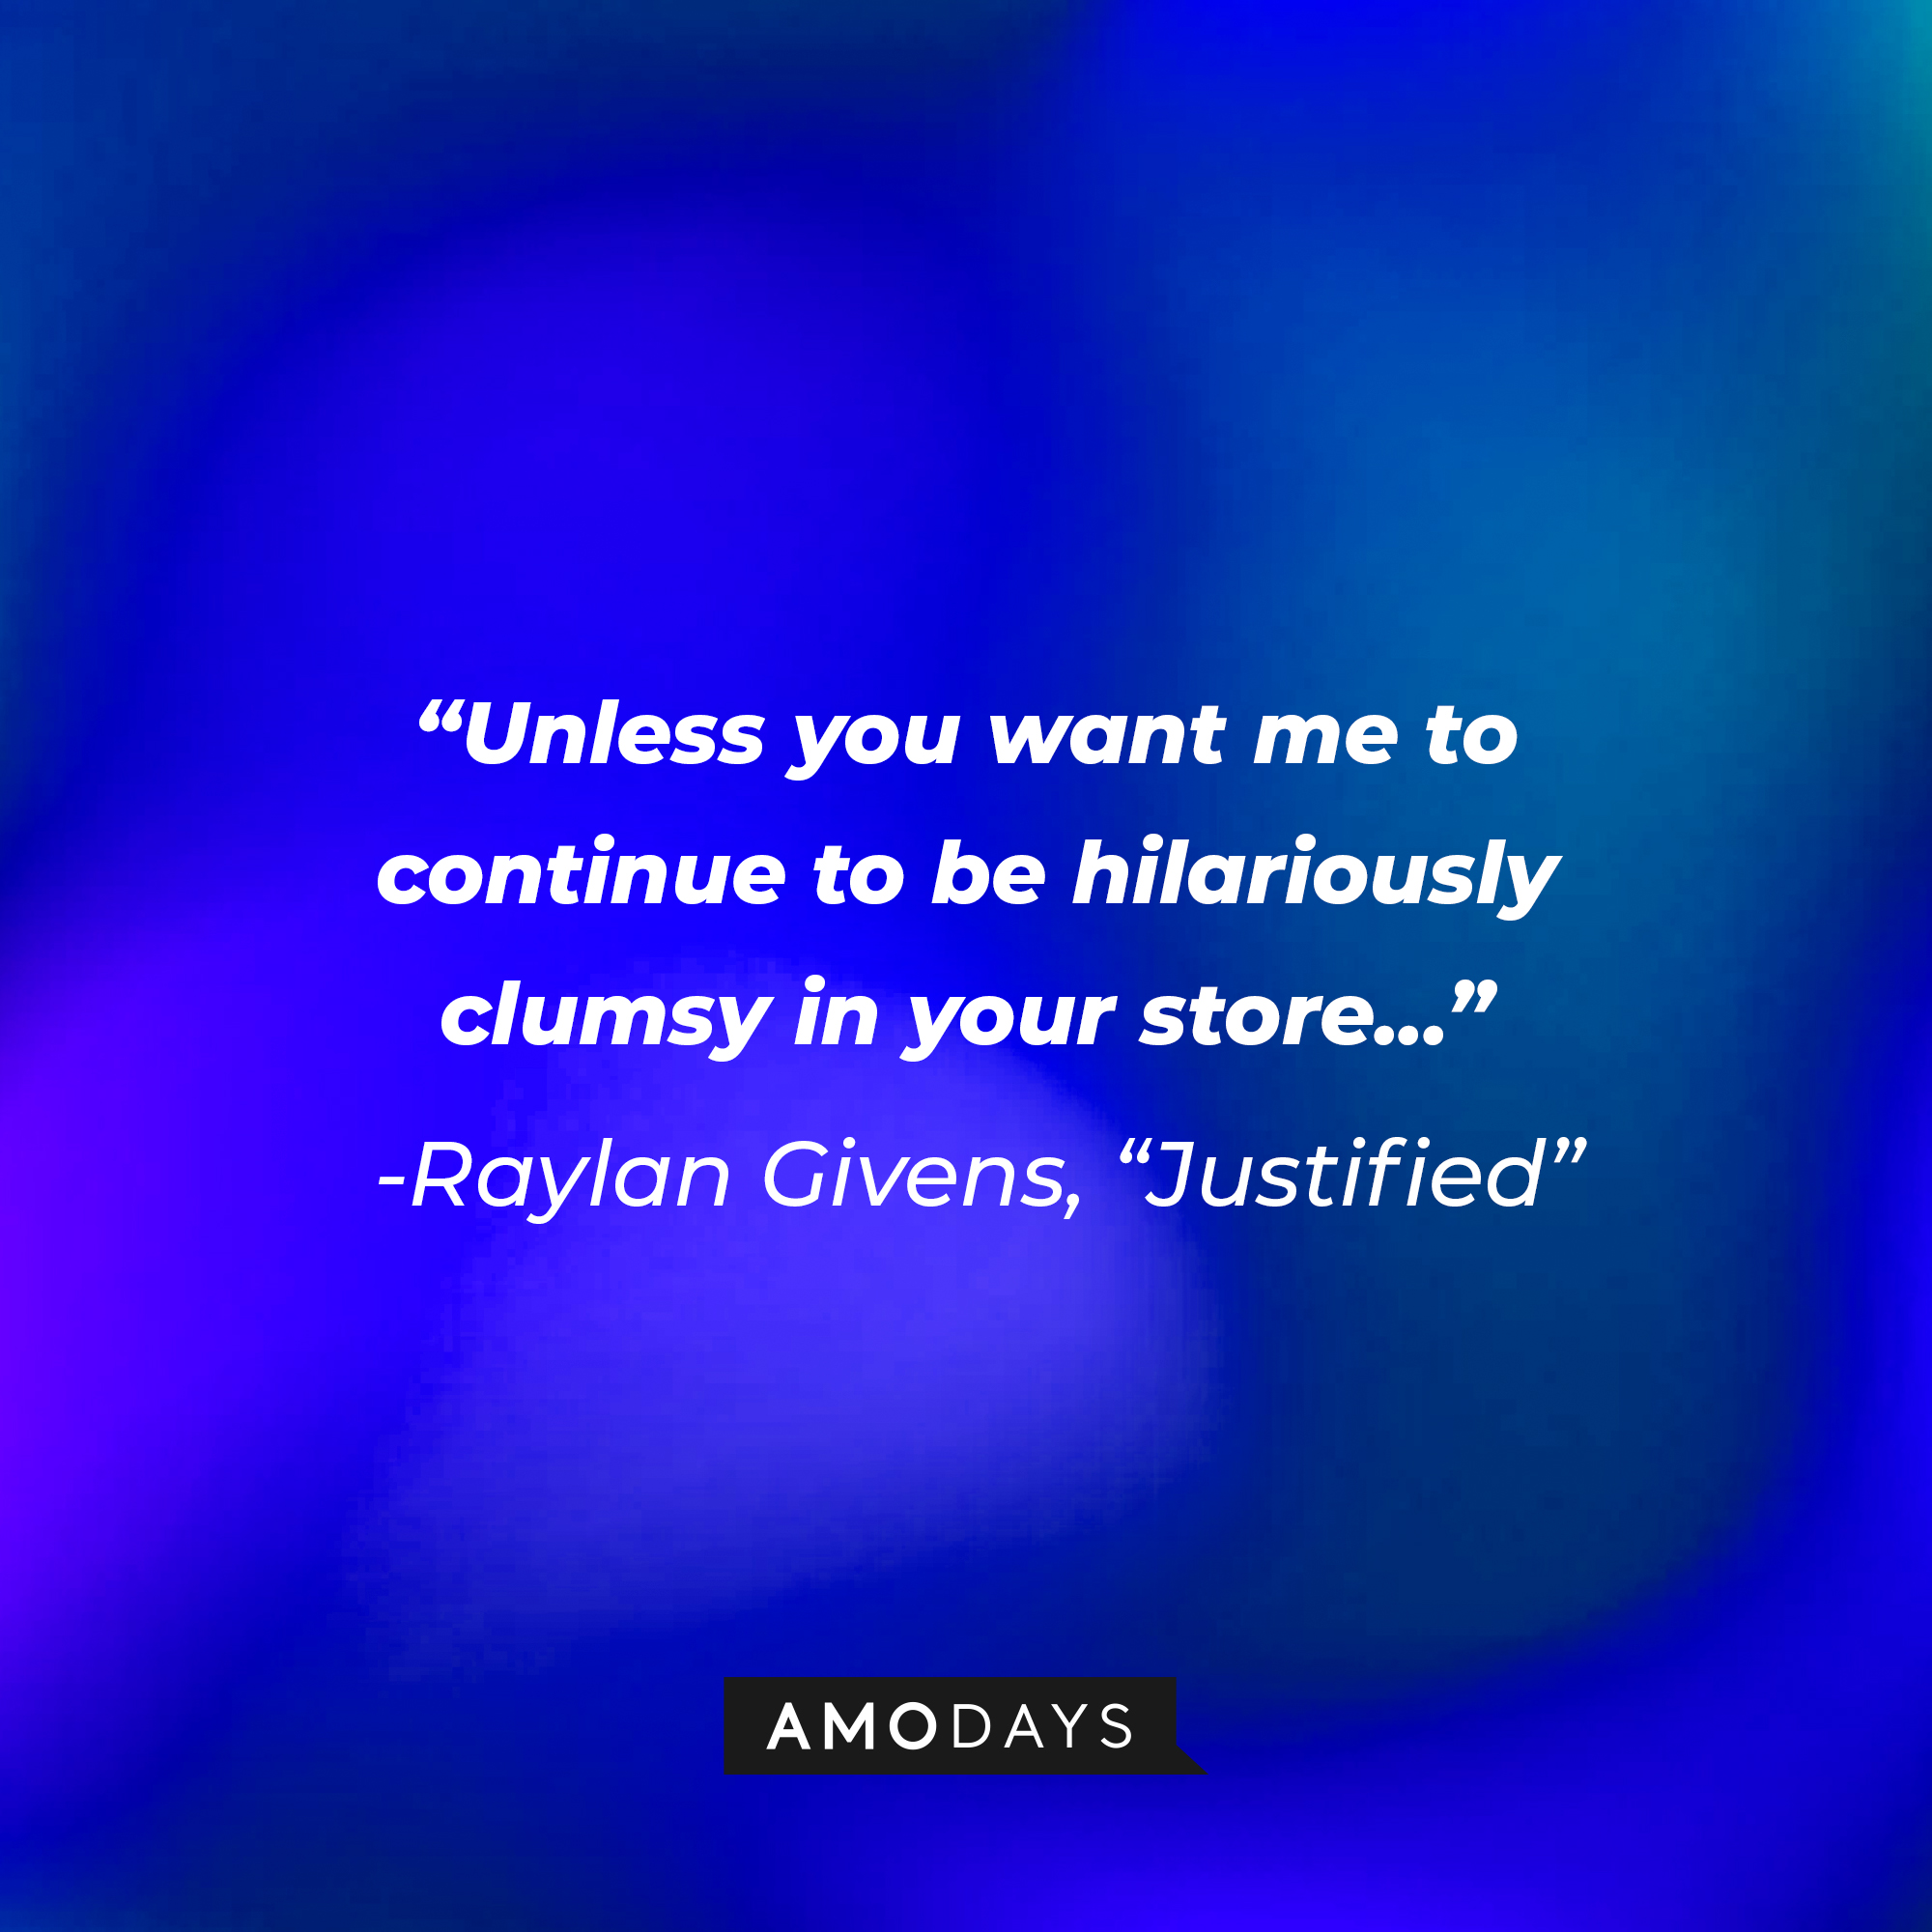 Raylan Givens’ quote from “Justified”: “Unless you want me to continue to be hilariously clumsy in your store...” | Source: AmoDays